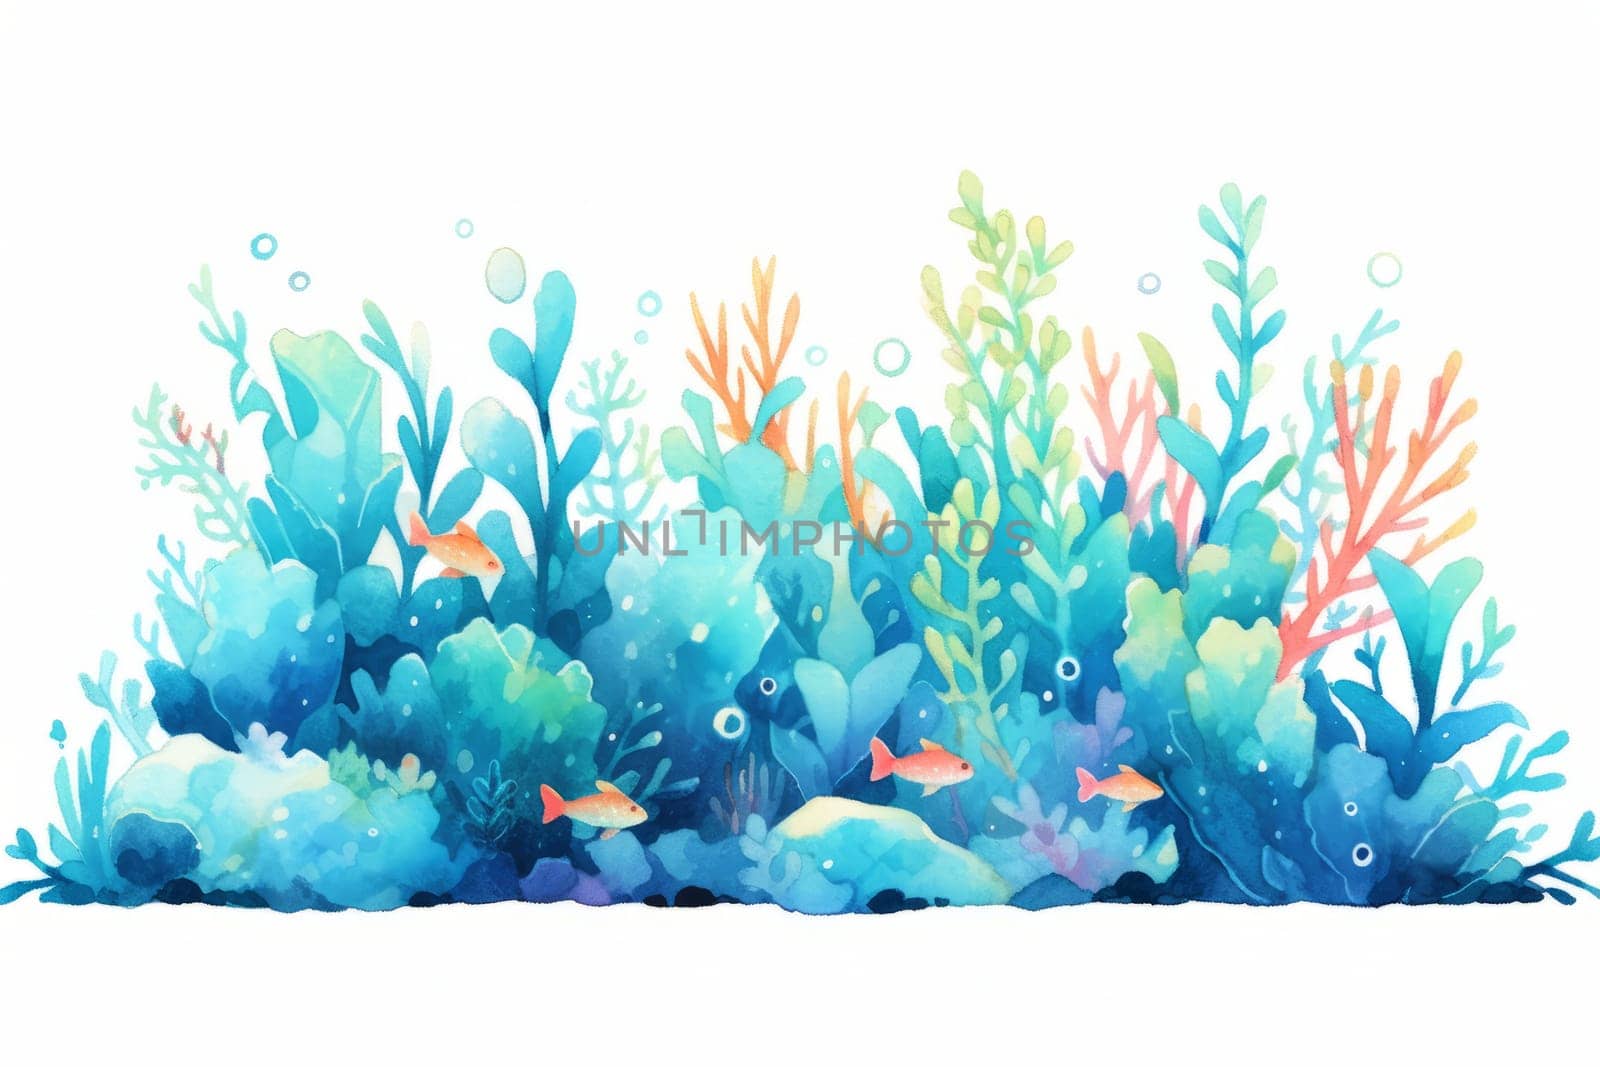 Seaweed on a seabed landscape hand painted watercolor illustration